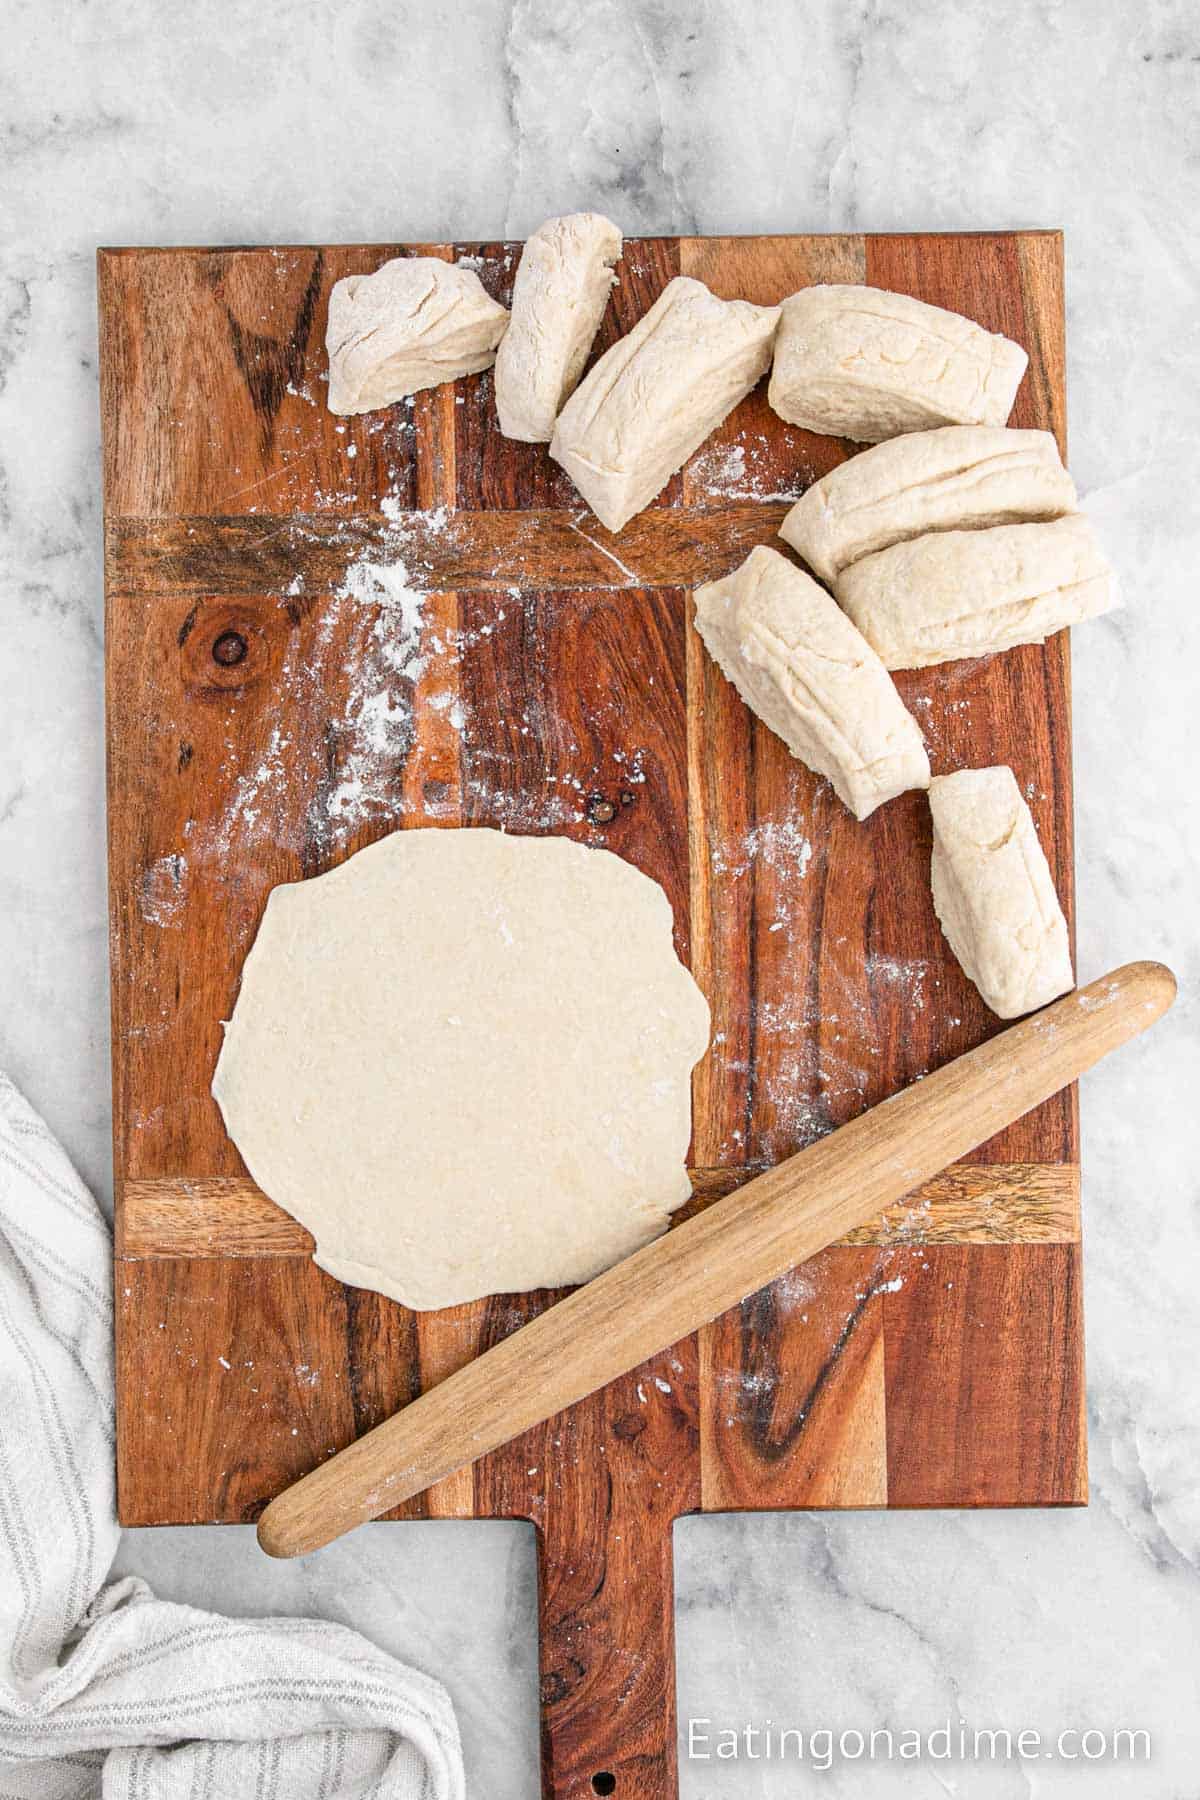 flatten the dough into a round size